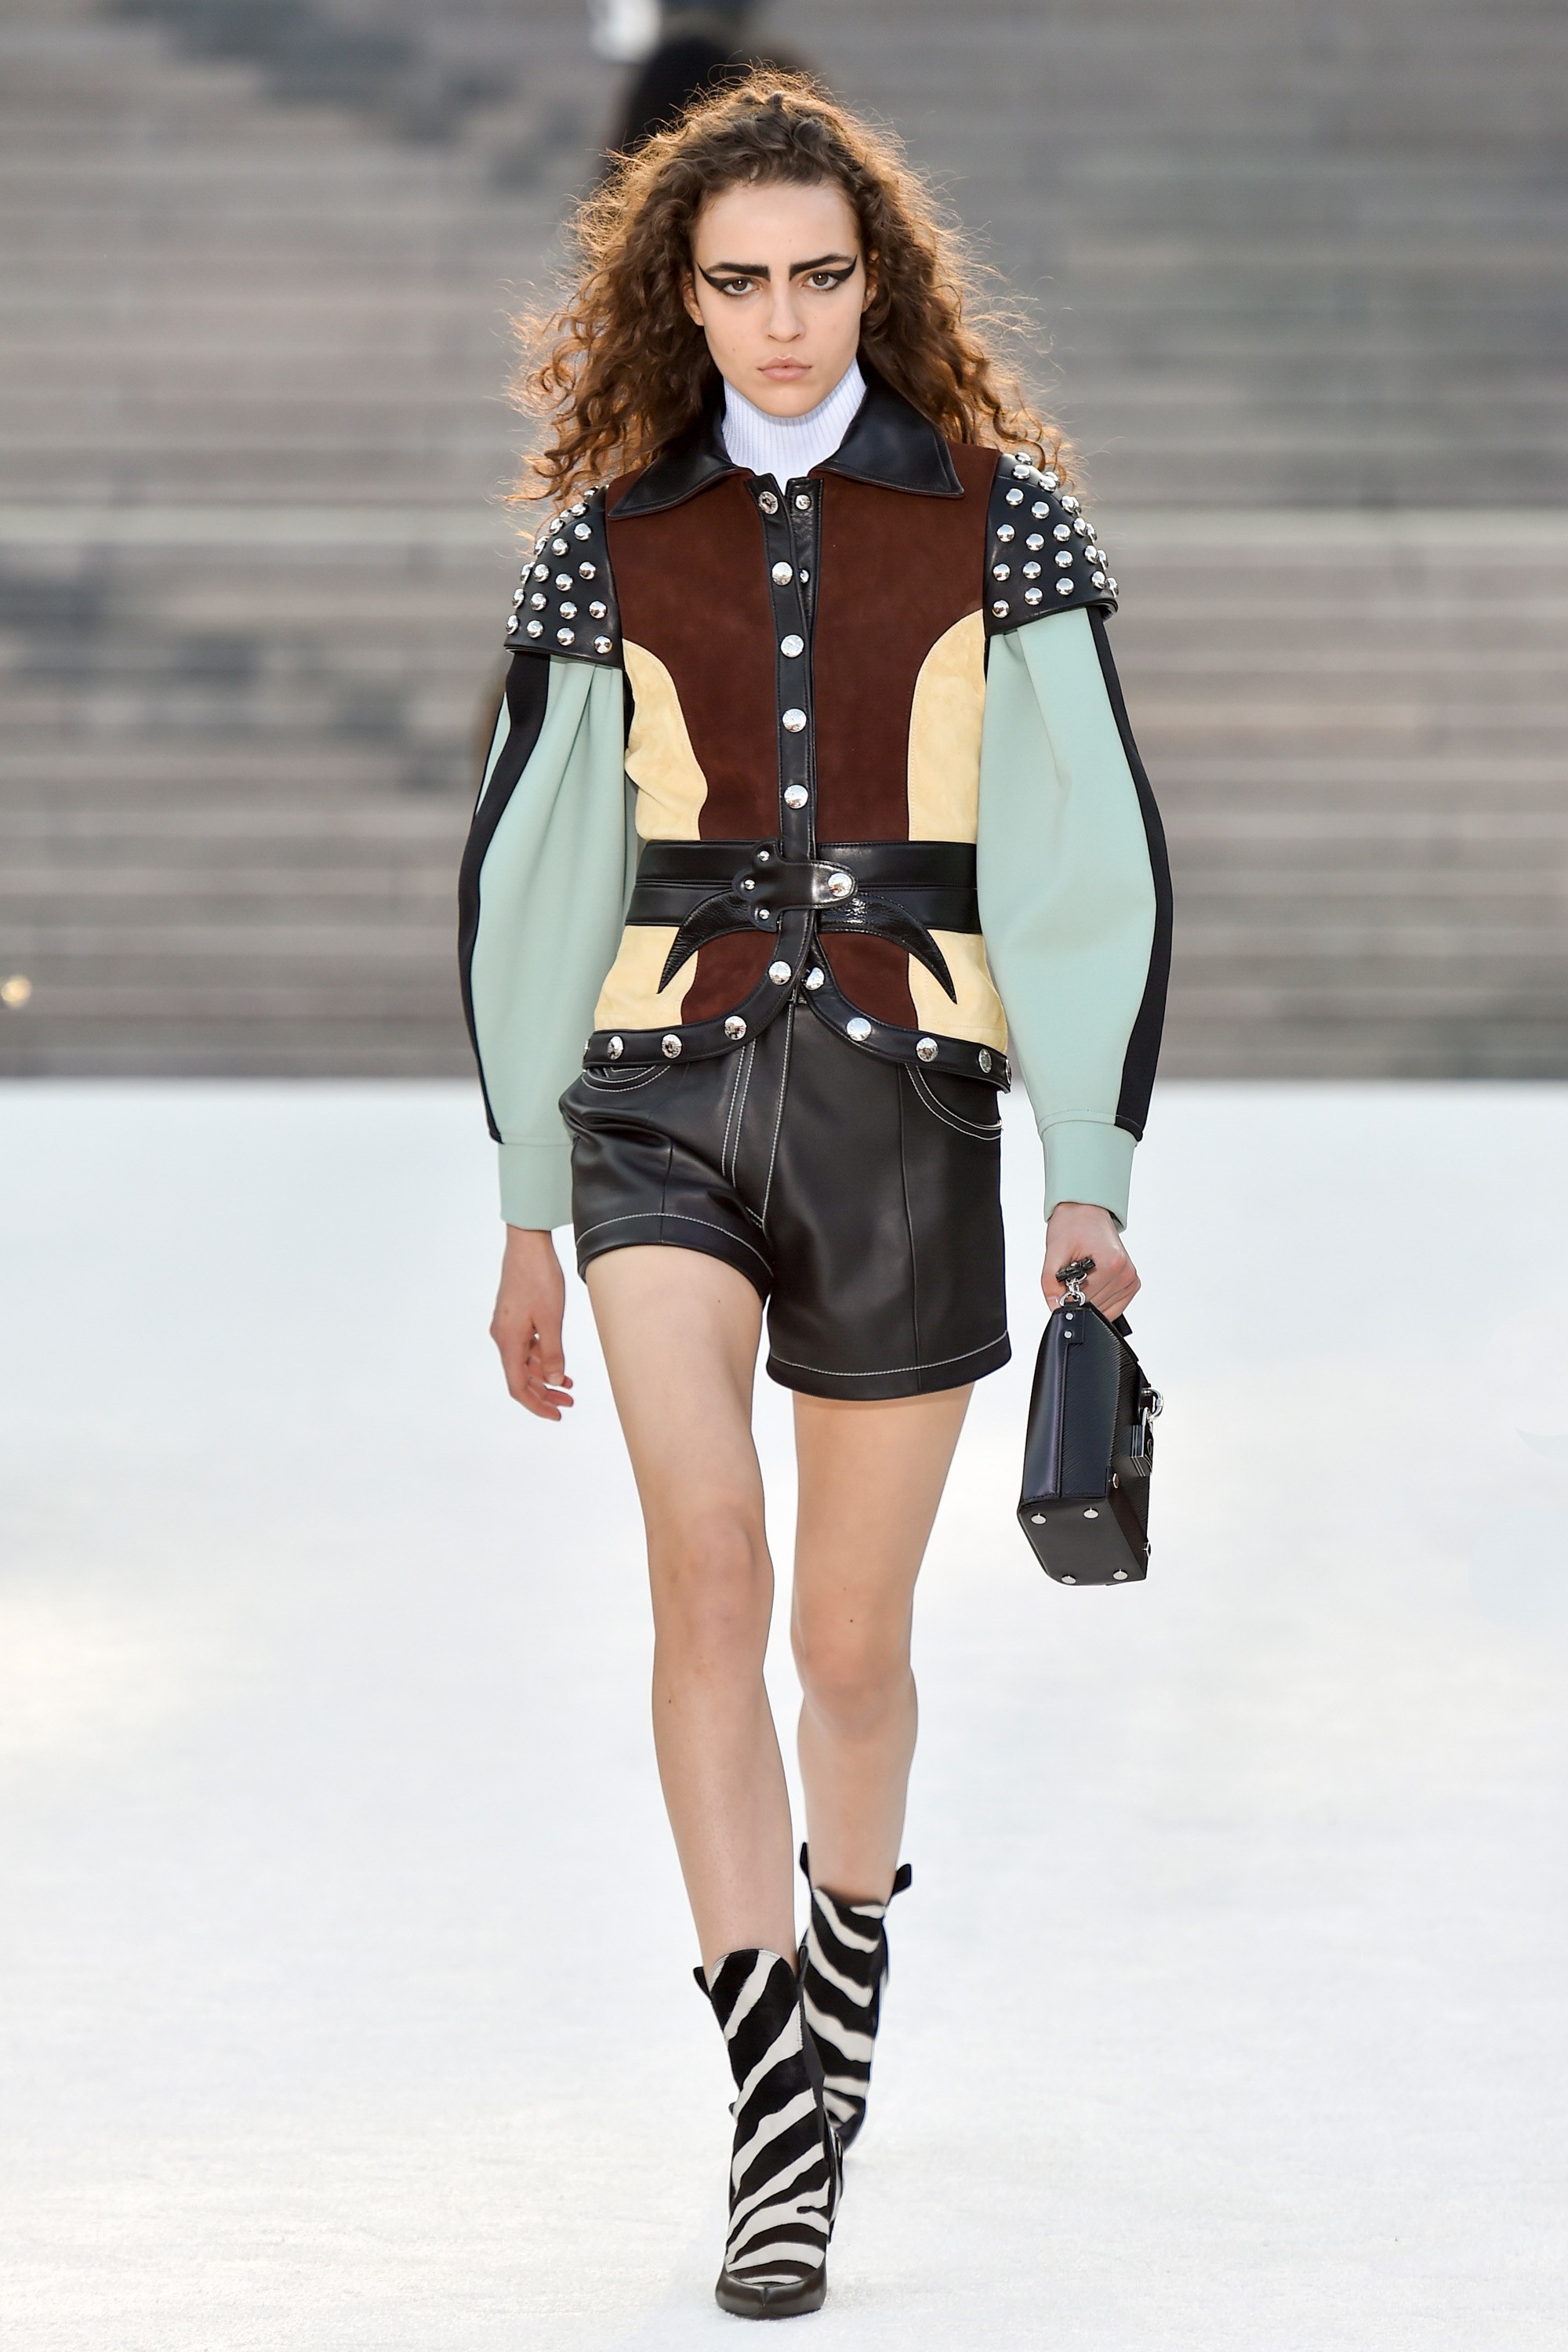 Photo #1a004 from Louis Vuitton Cruise 2018